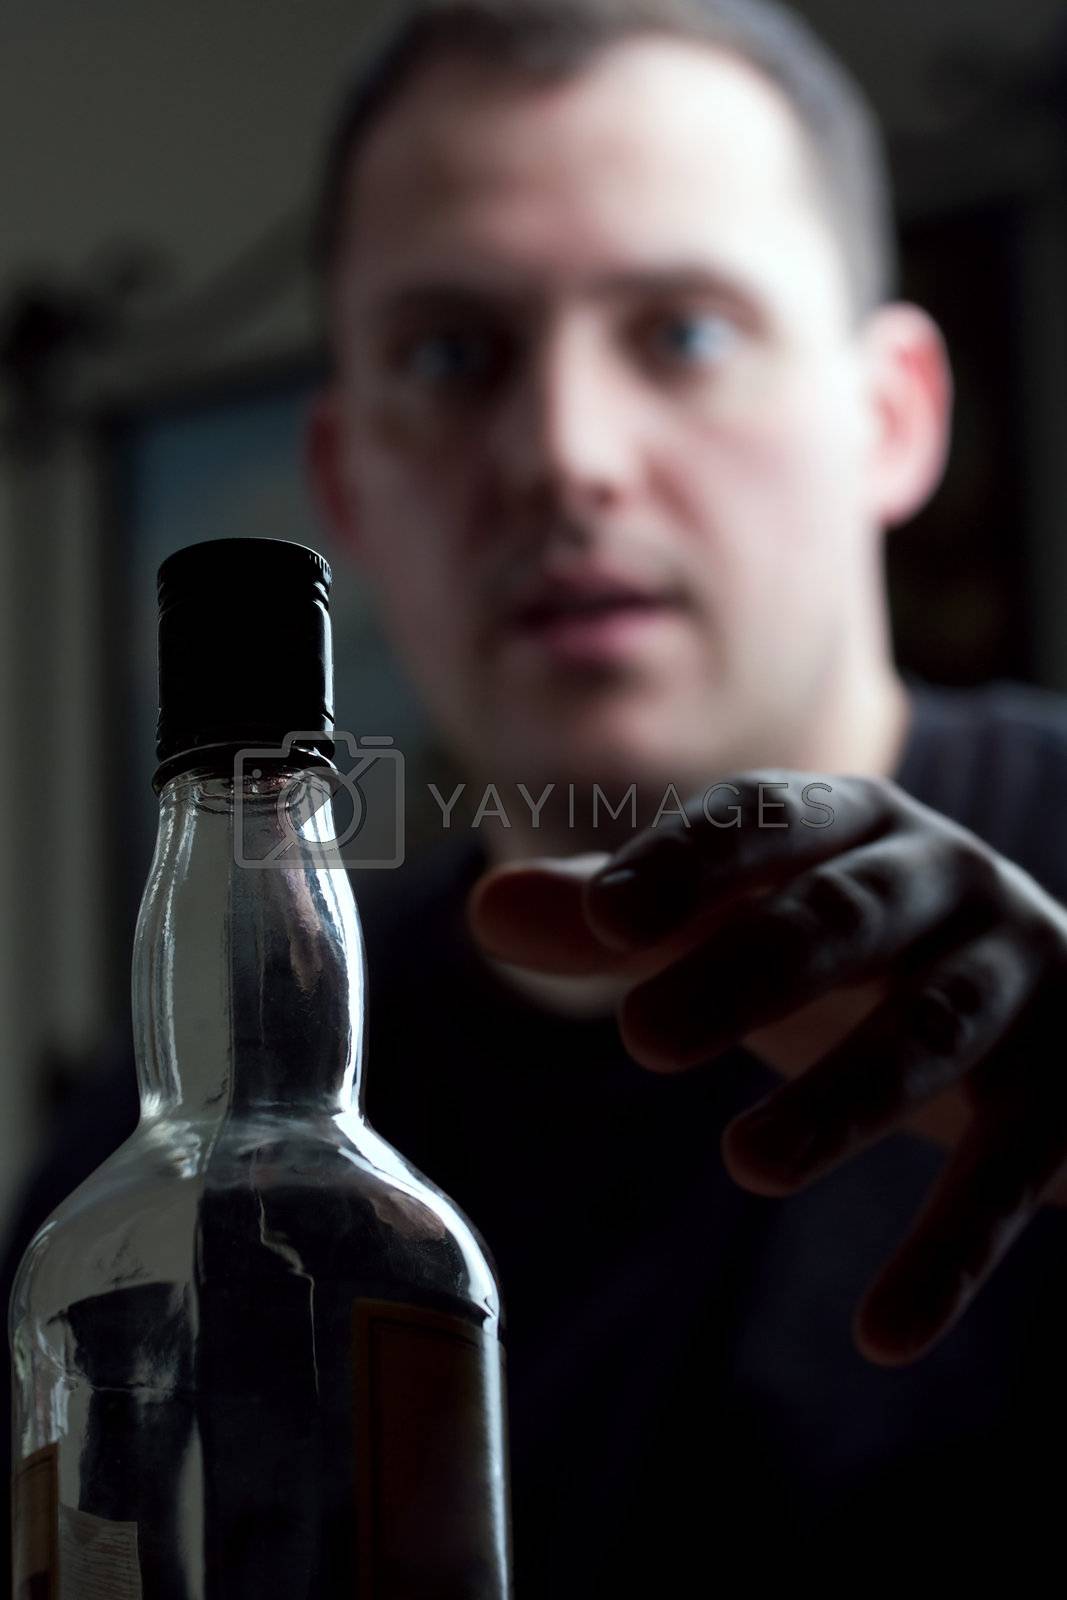 Royalty free image of Man Reaching For the Liquor Bottle by graficallyminded